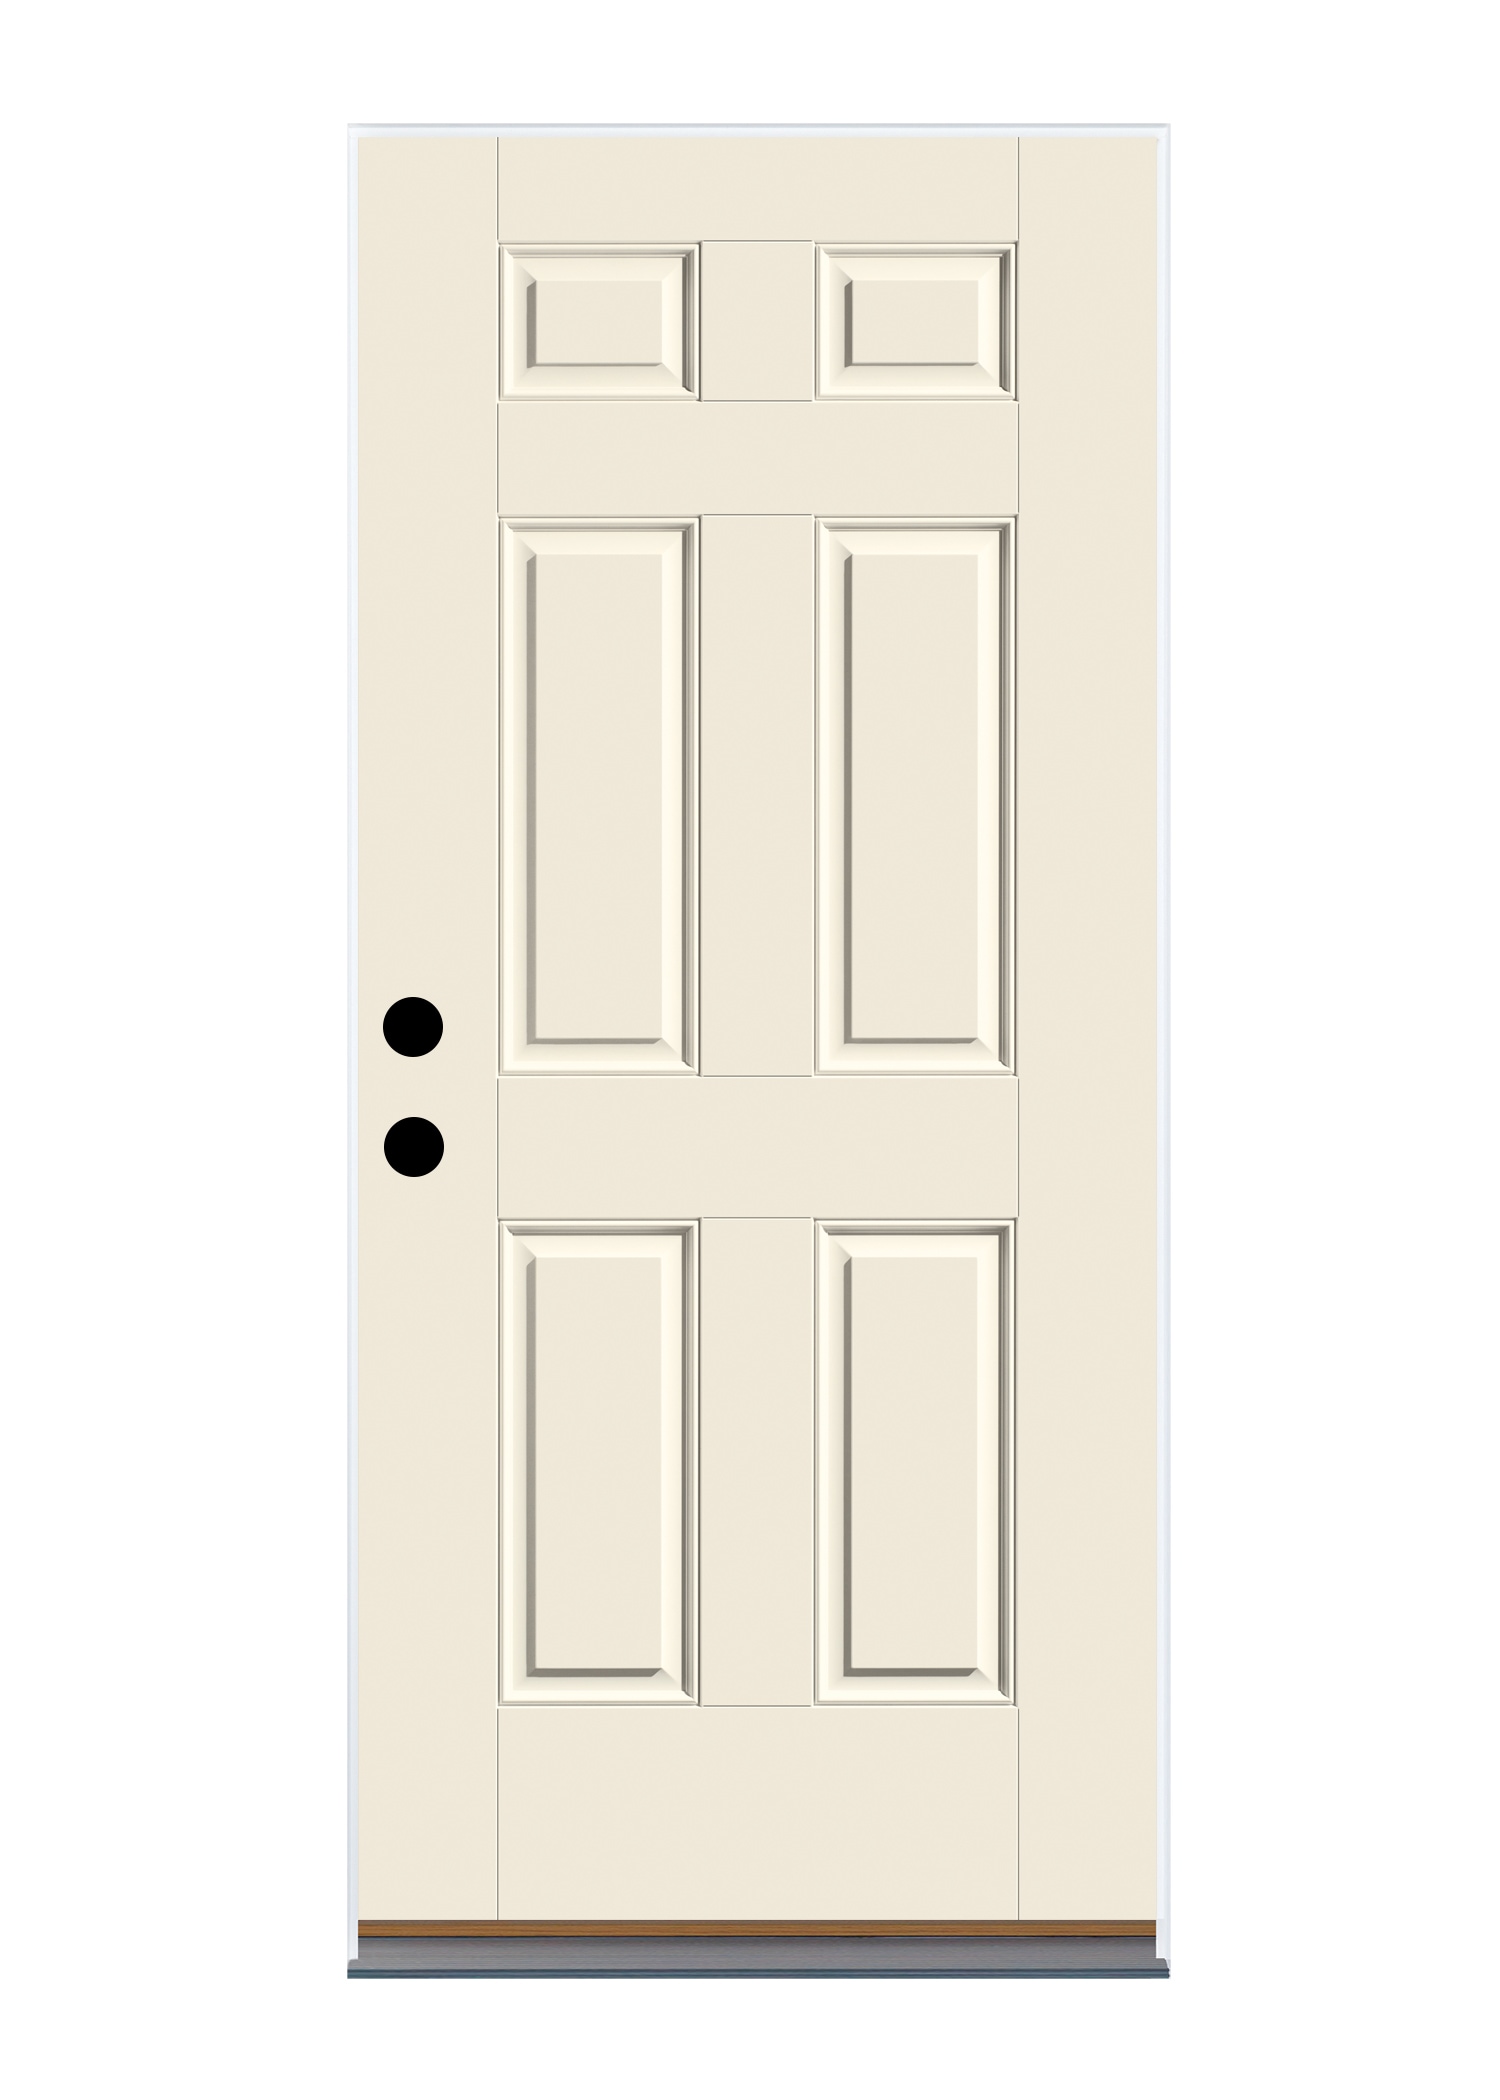 Therma-Tru Benchmark Doors 36-in x 80-in Fiberglass Half Lite Left-Hand Inswing Ready To Paint Prehung Single Front Door Insulating Core with Blinds -  B6S30SD8P12ZMBECZUULIN4